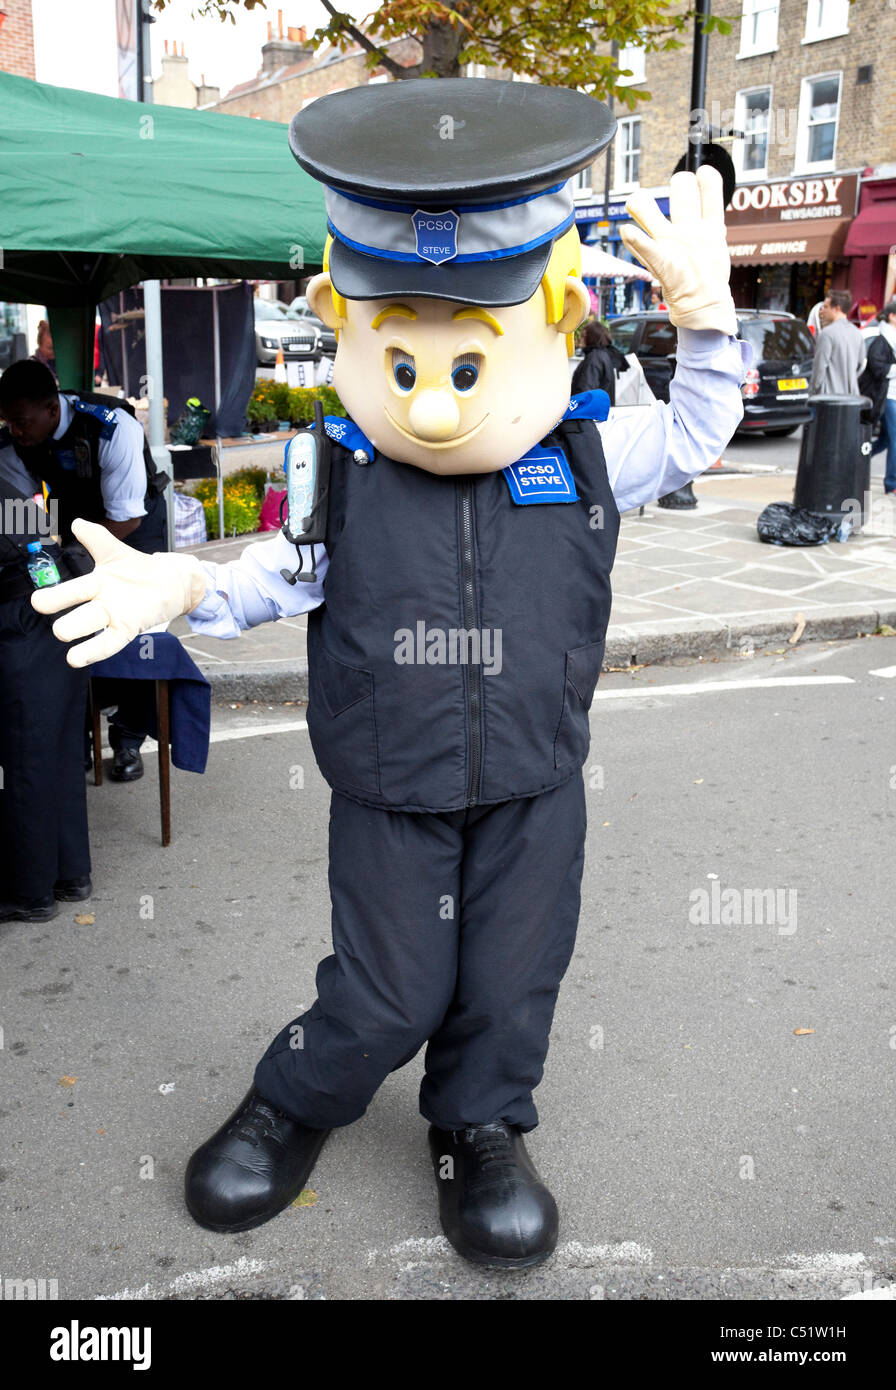 A person wearing a police costume, London, England, UK Stock Photo - Alamy